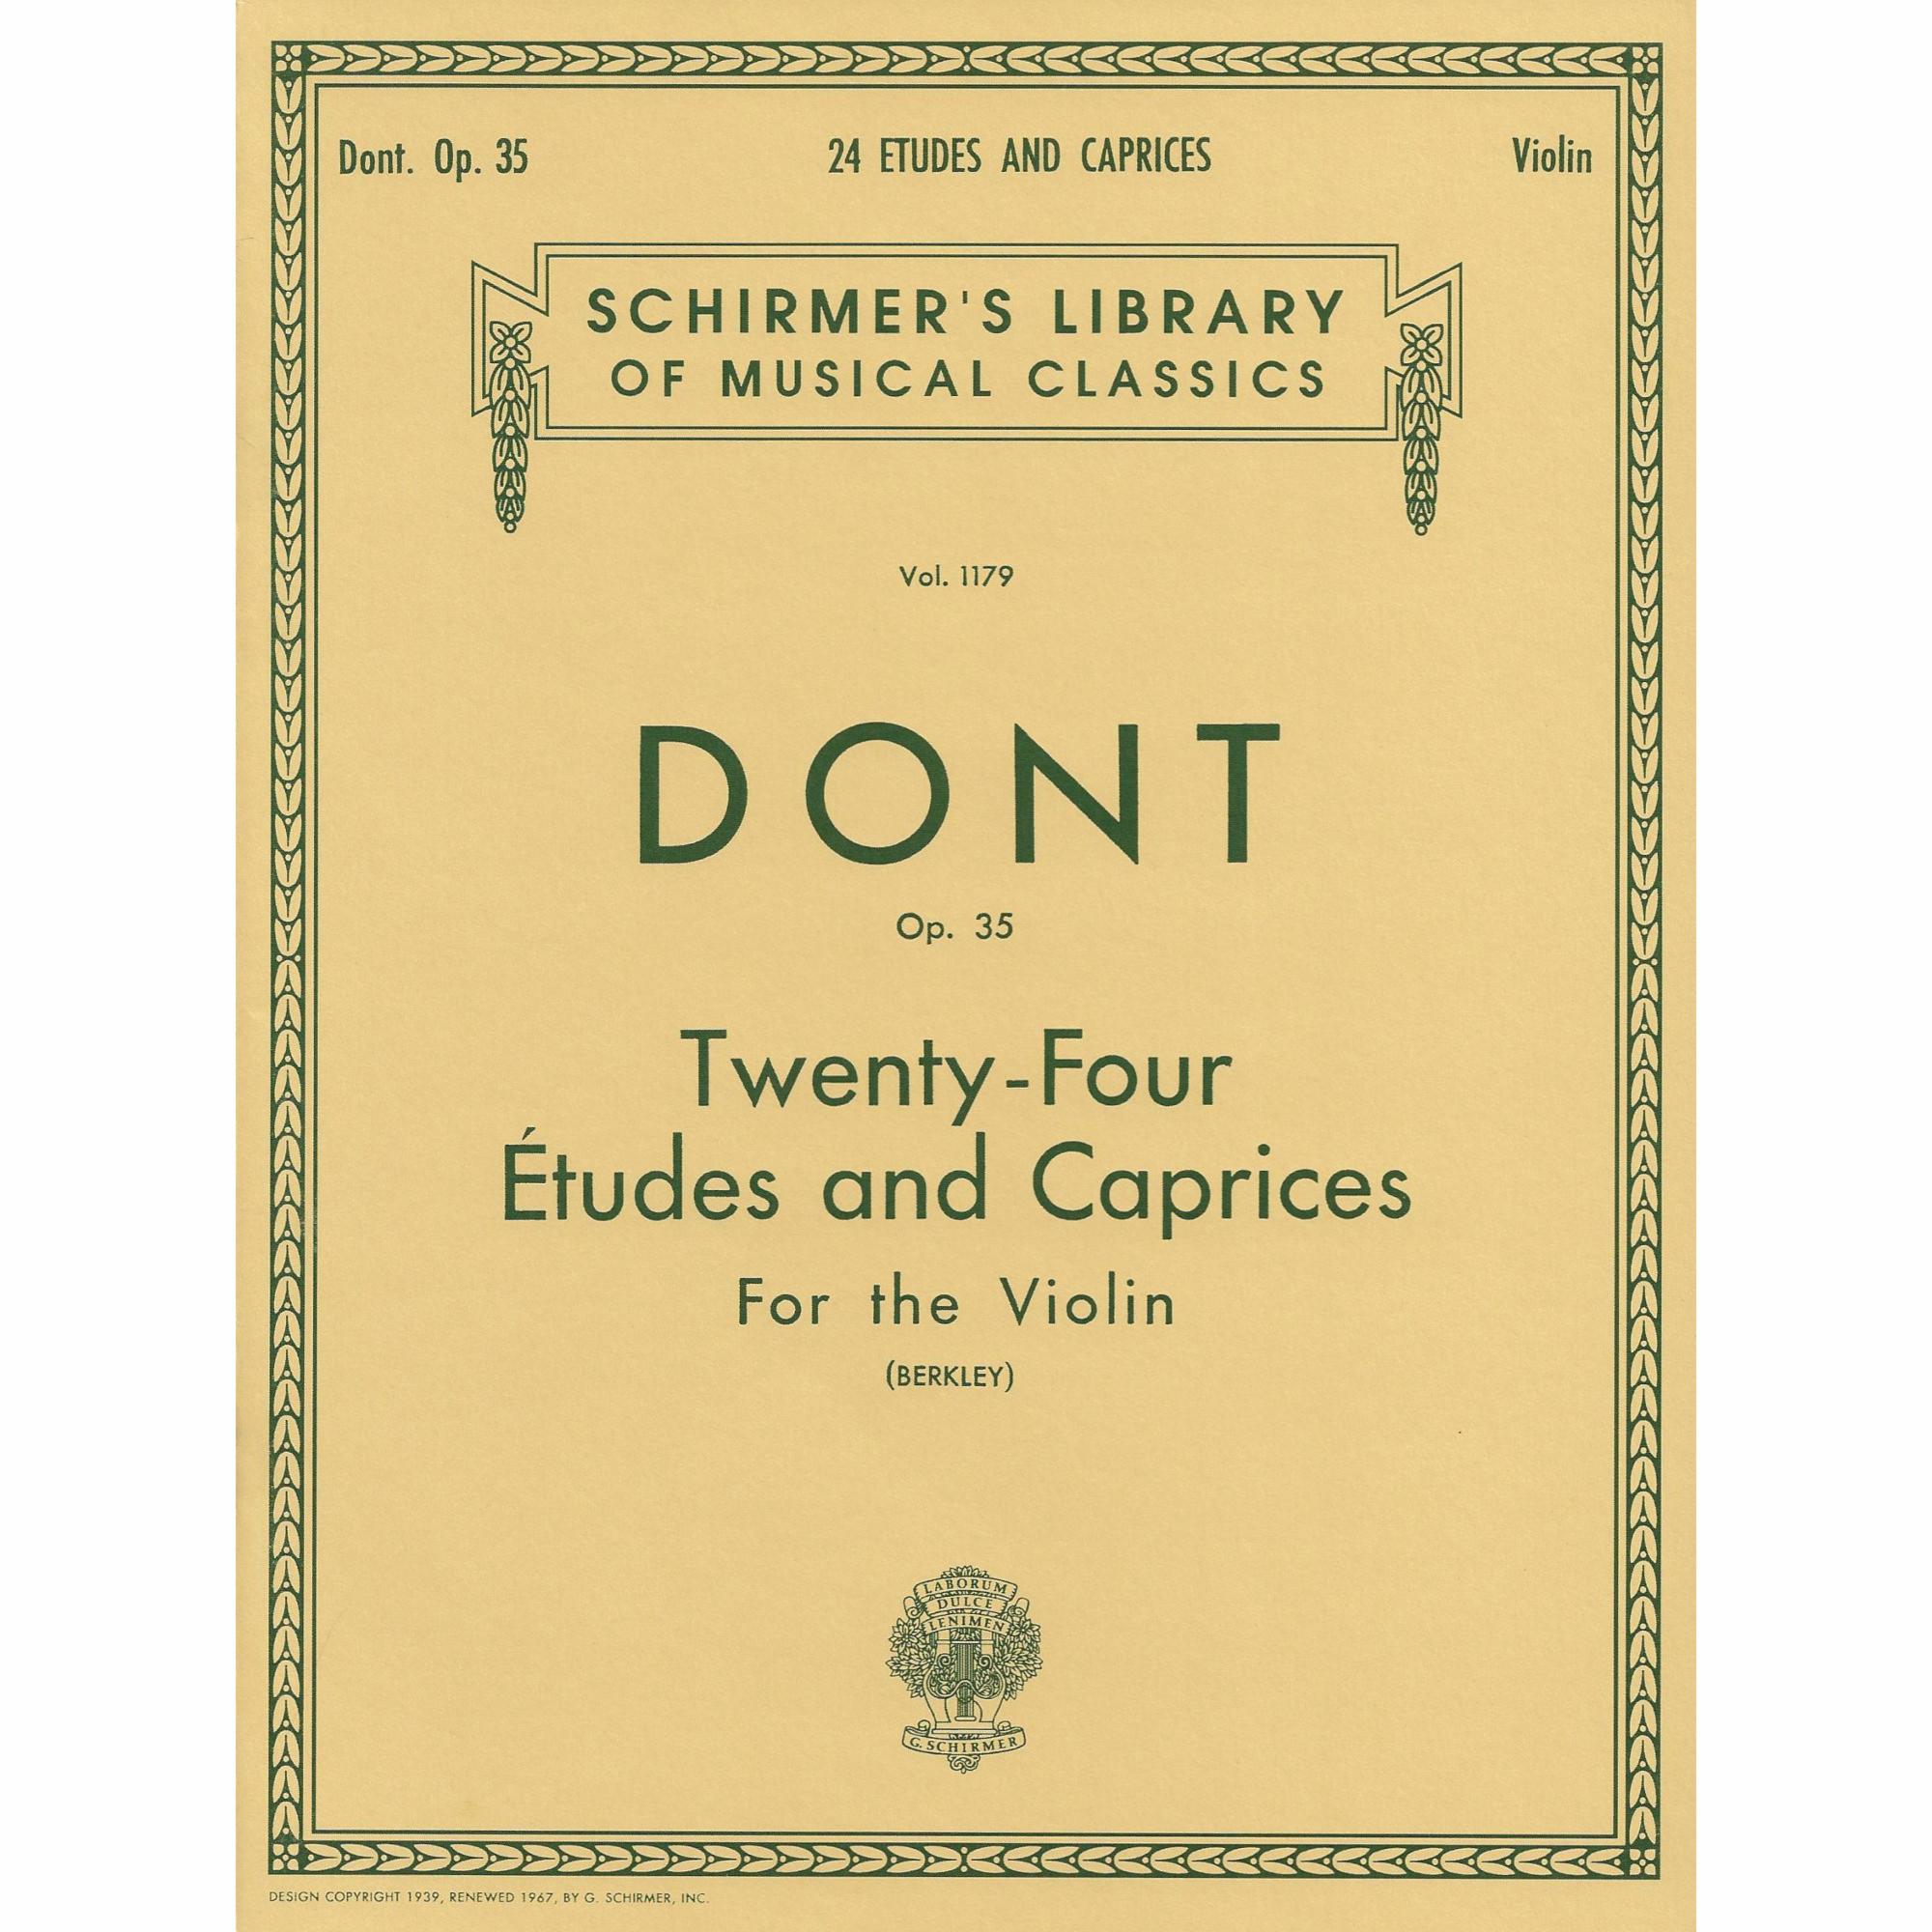 Dont -- Twenty-Four Etudes and Caprices, Op. 35 for Violin